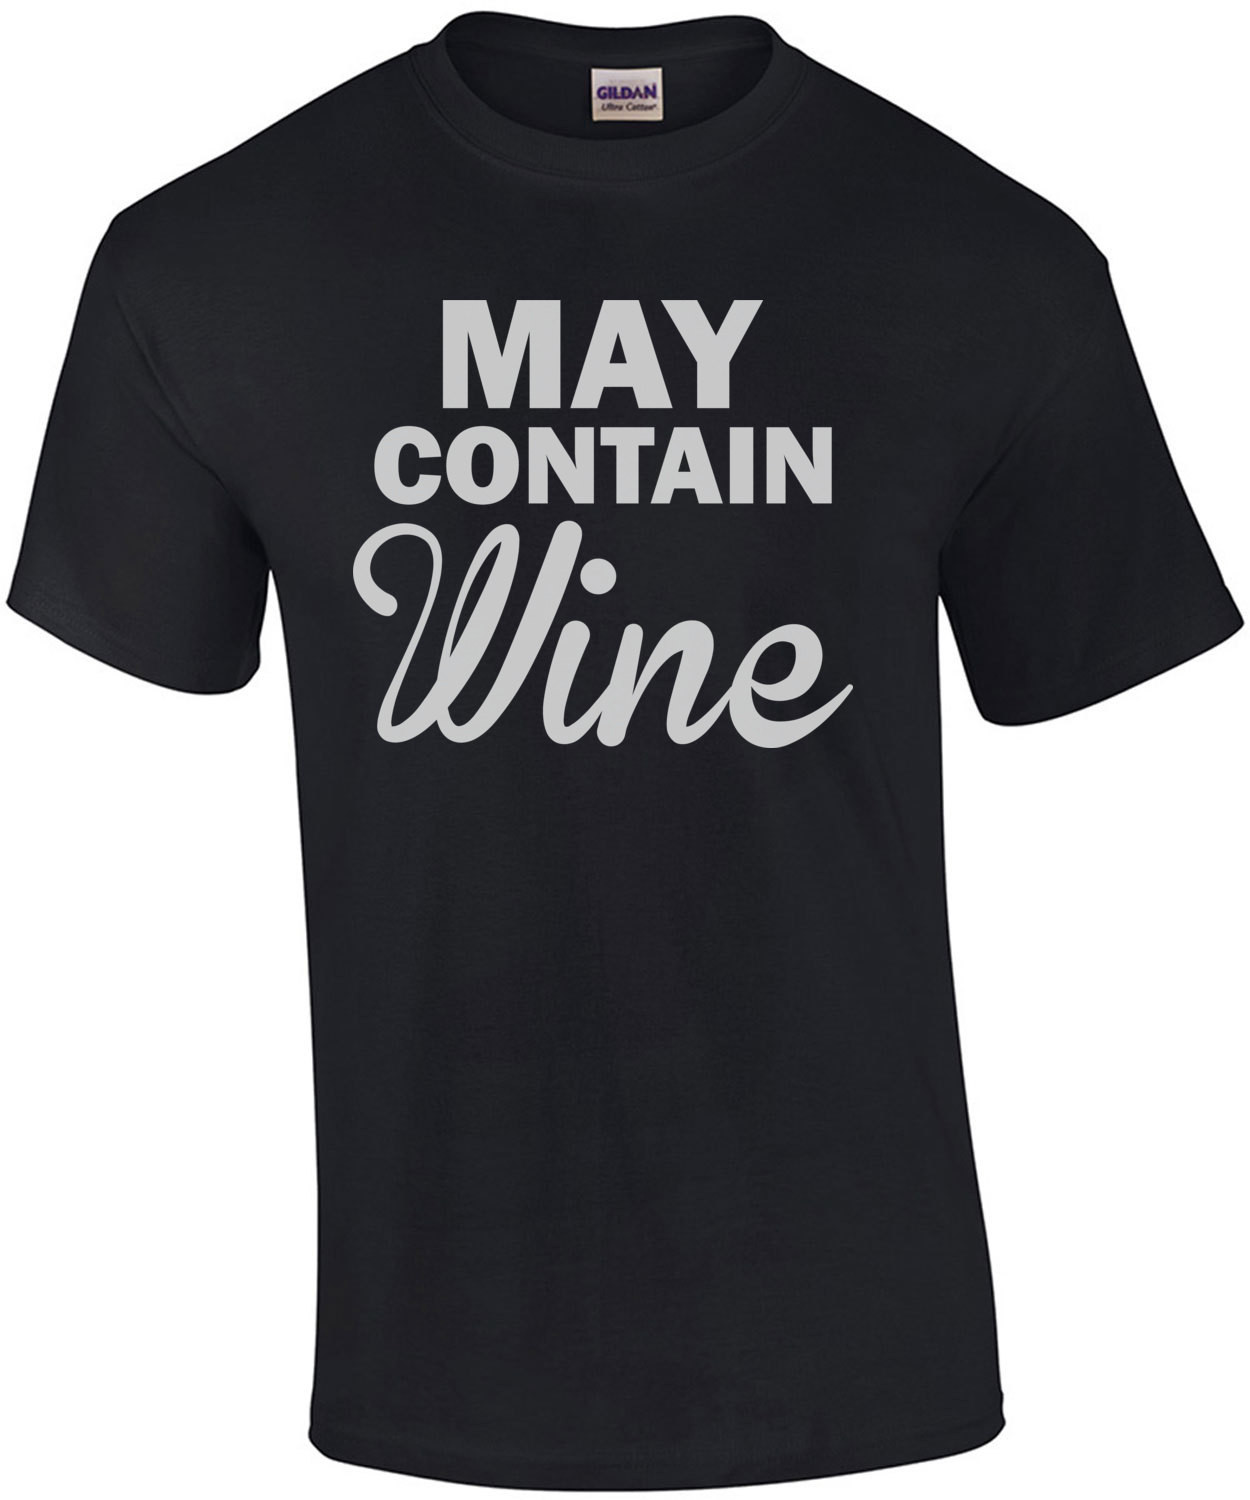 May Contain wine - funny wine t-shirt